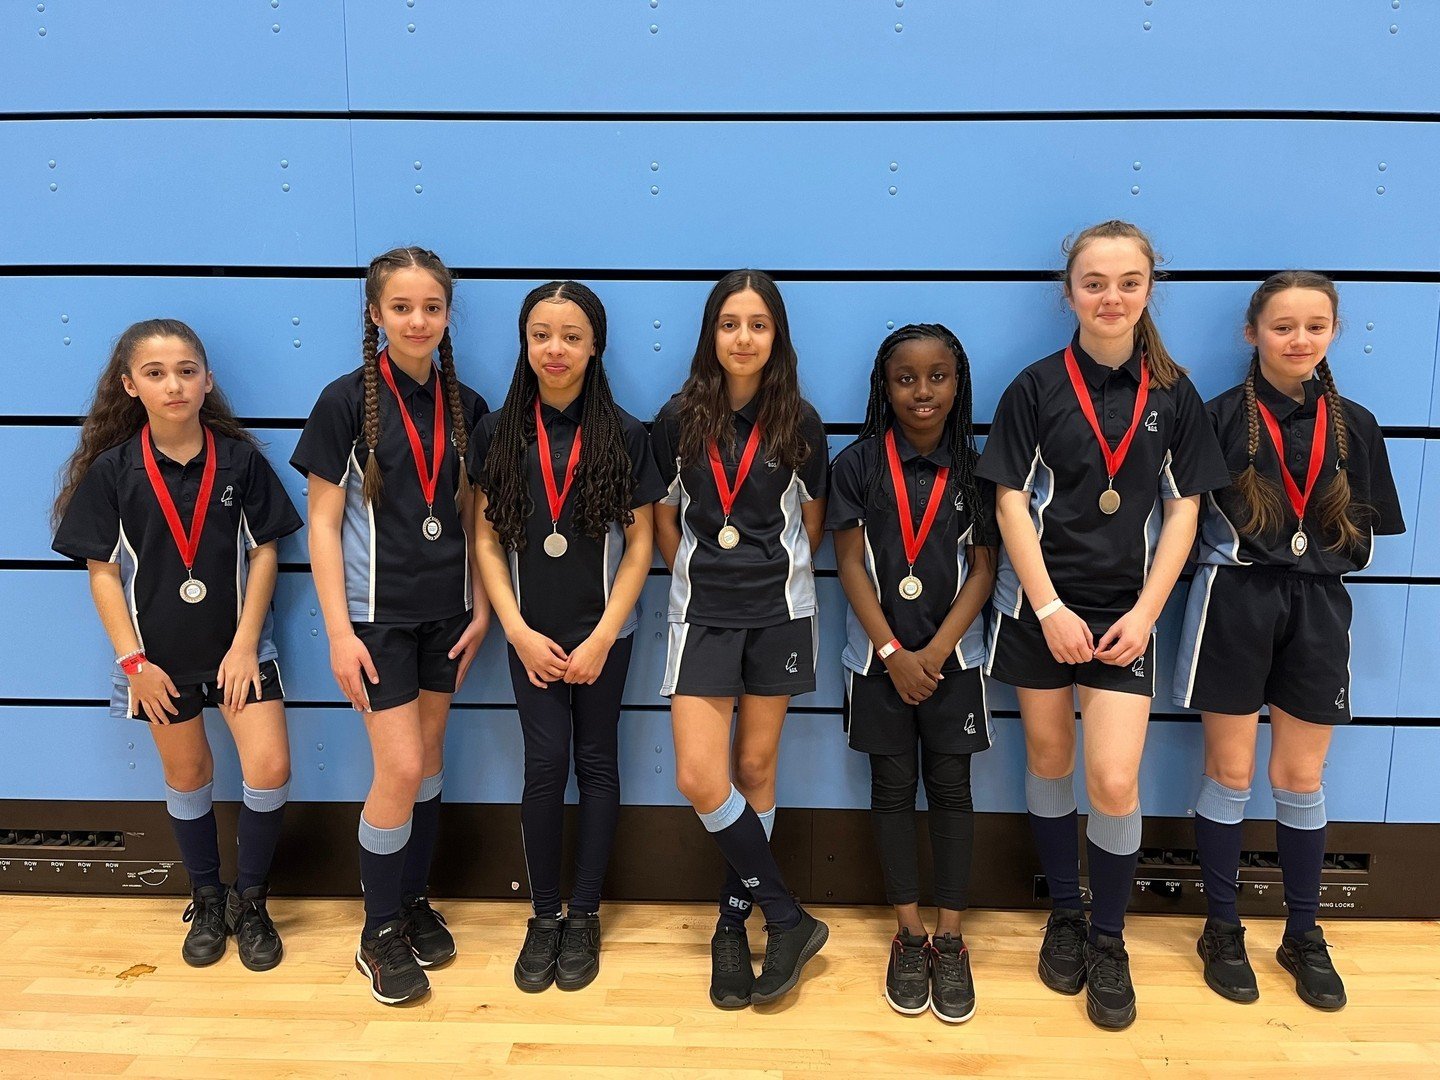 On Monday 15th April the Y7 boys and girls indoor athletics teams went to the final at the University of Birmingham to compete against 11 other schools across Birmingham. They all competed in a variety of track and field events throughout the day. We